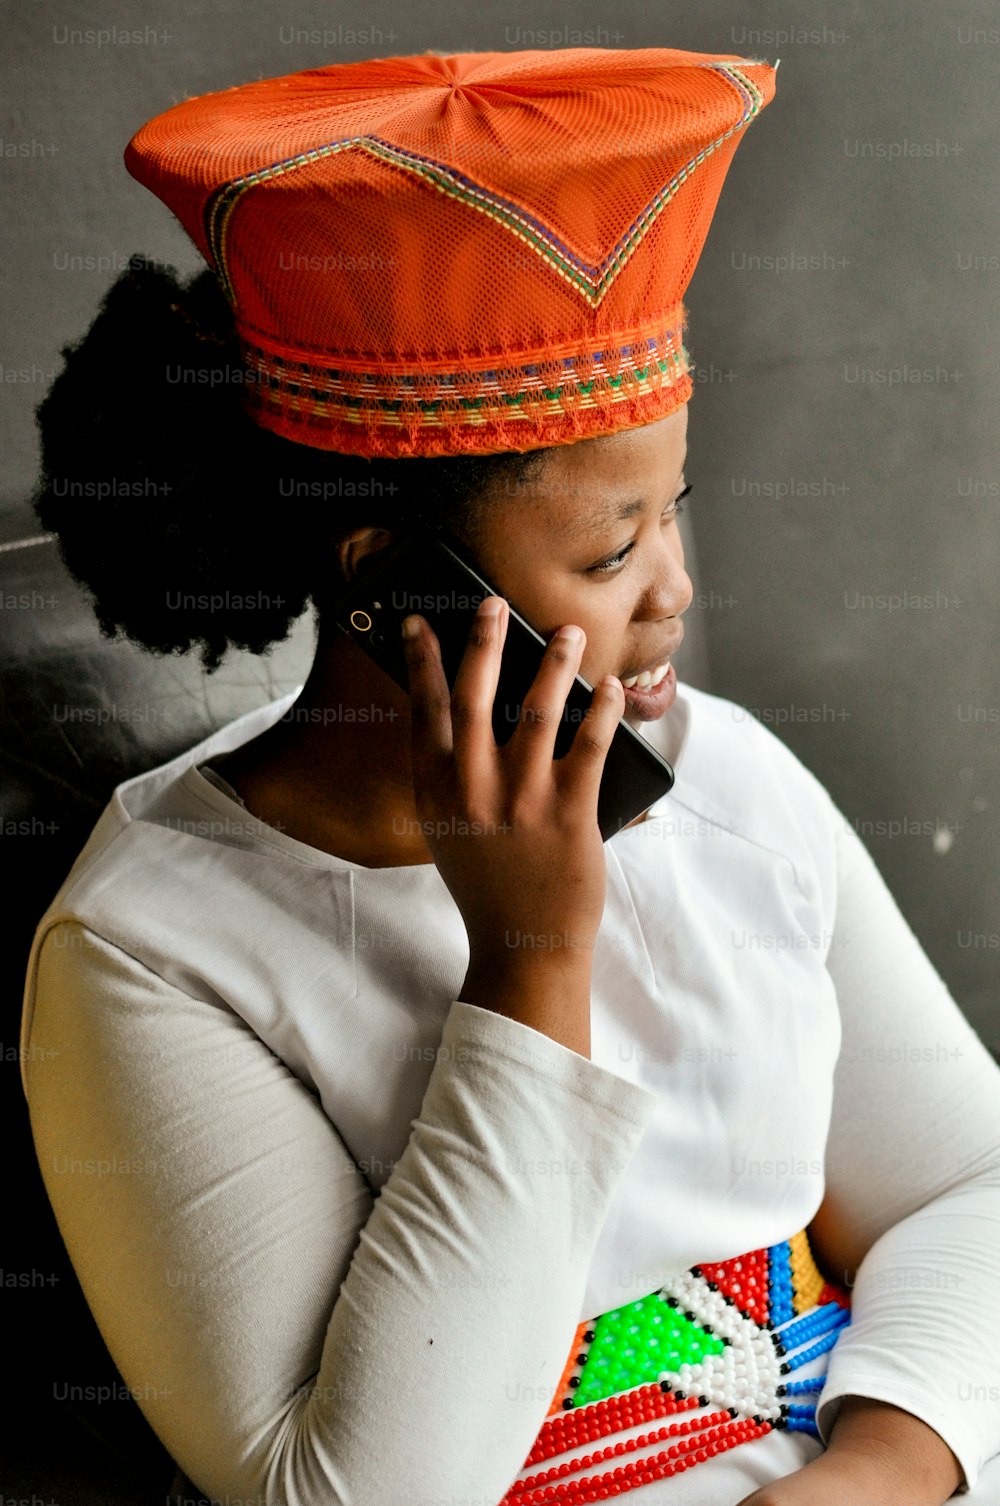 a woman wearing an orange hat talking on a cell phone